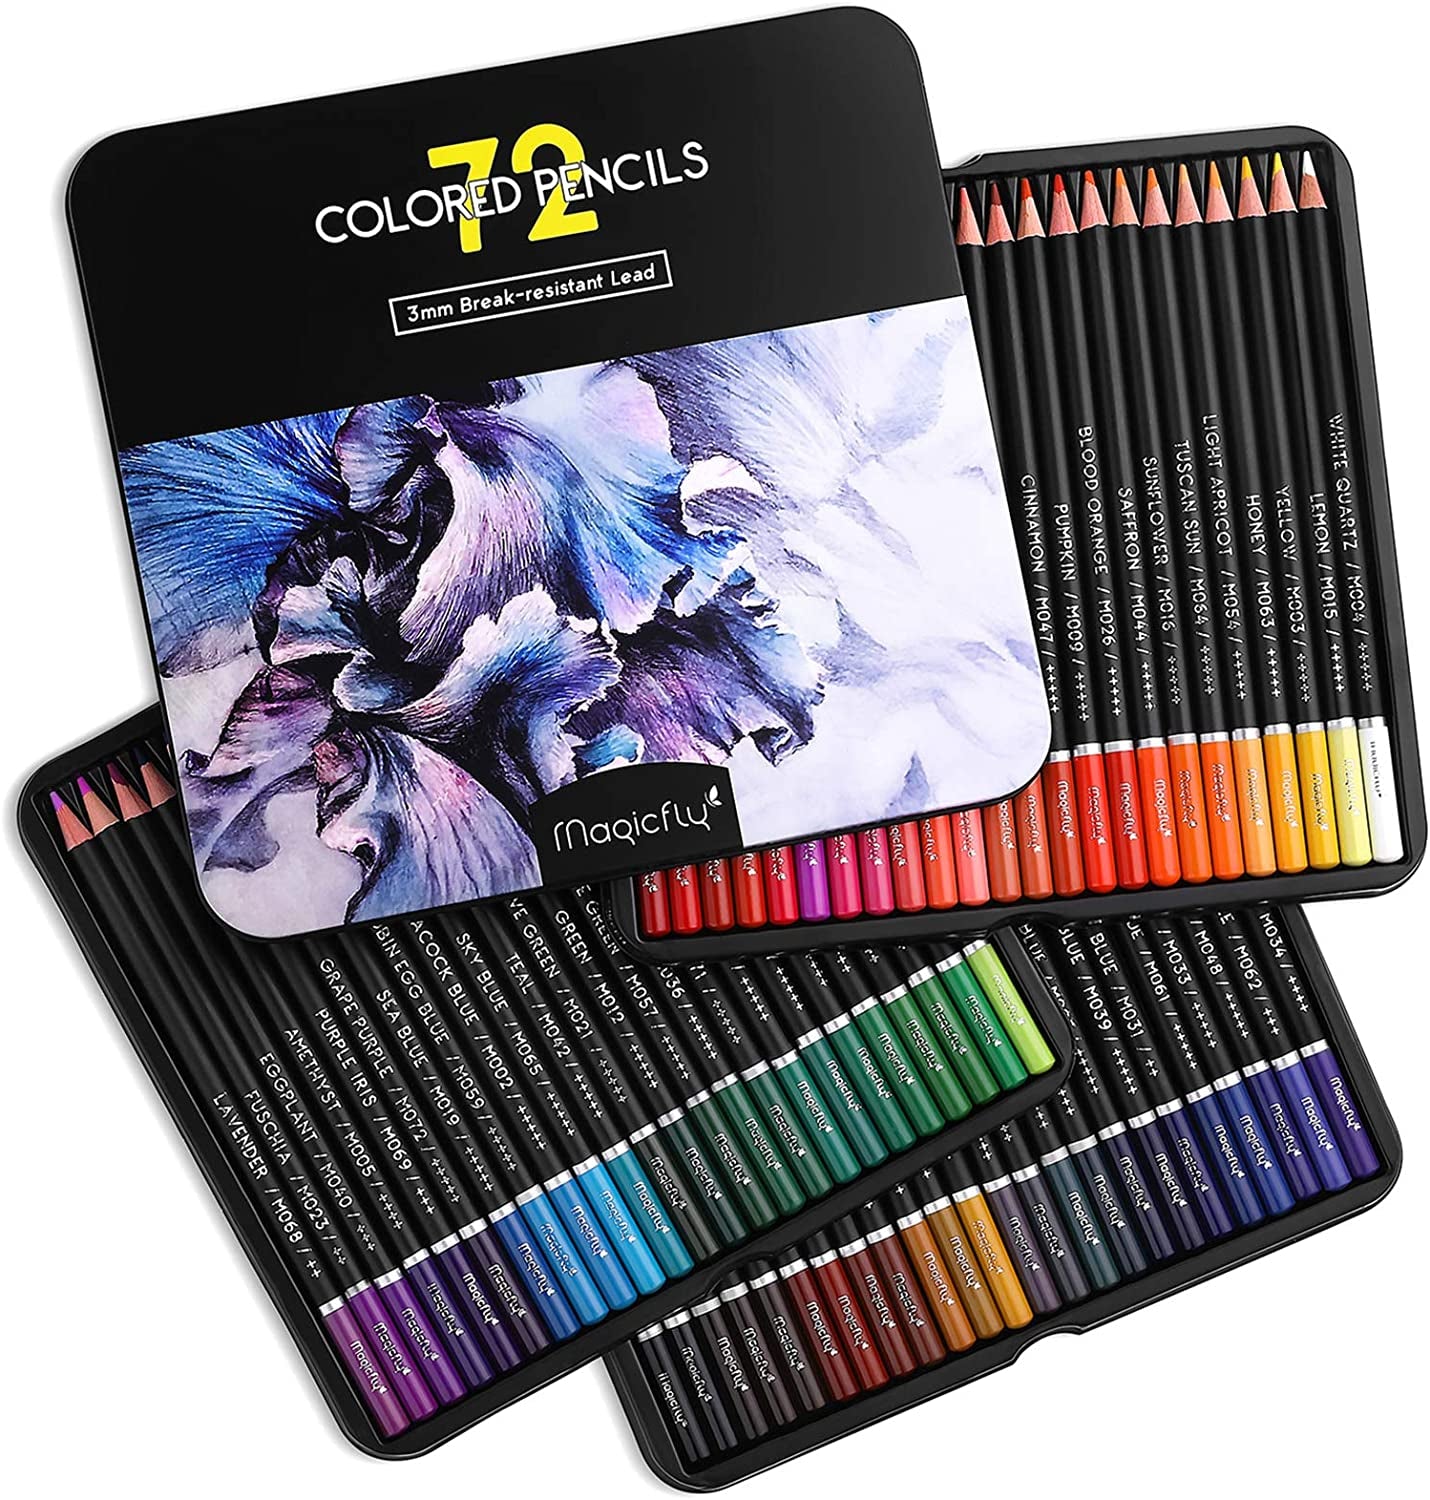 72 Colored Pencils Set, Oil-Based Colored Pencils for Adults, Artists, Art  Colored Pencils for Coloring Books, Drawing Arts & Sketching